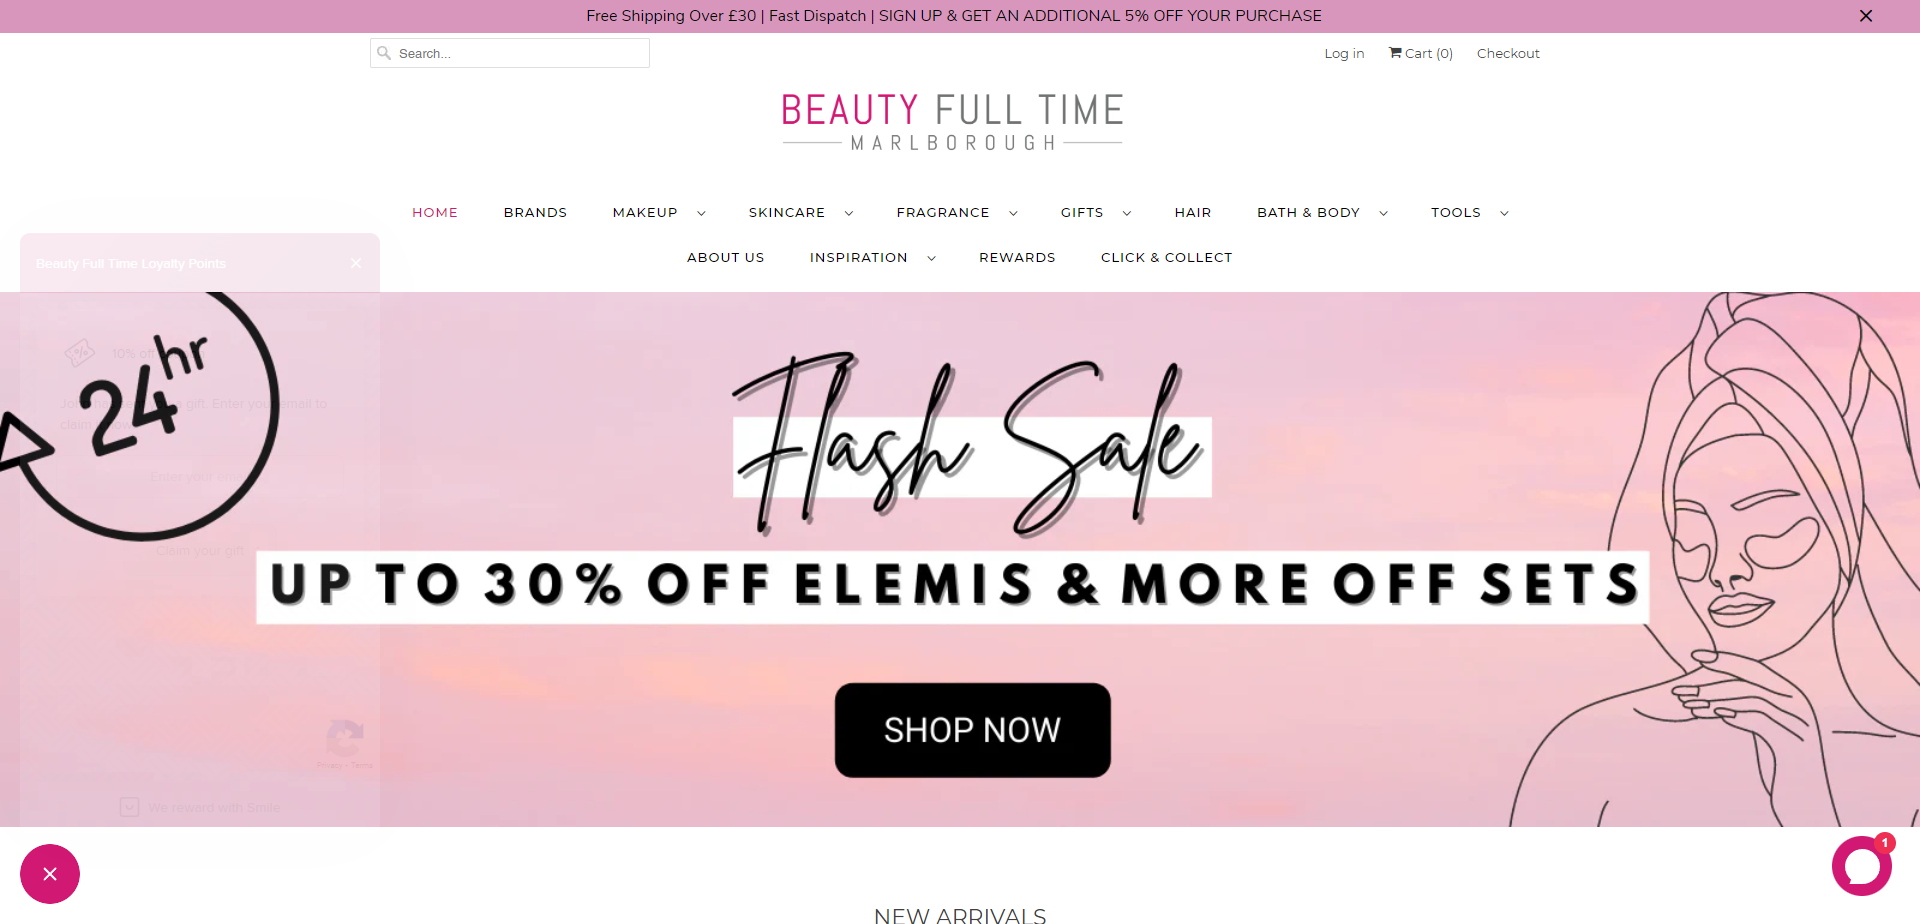 Referral Landing Page for Beauty Full Time